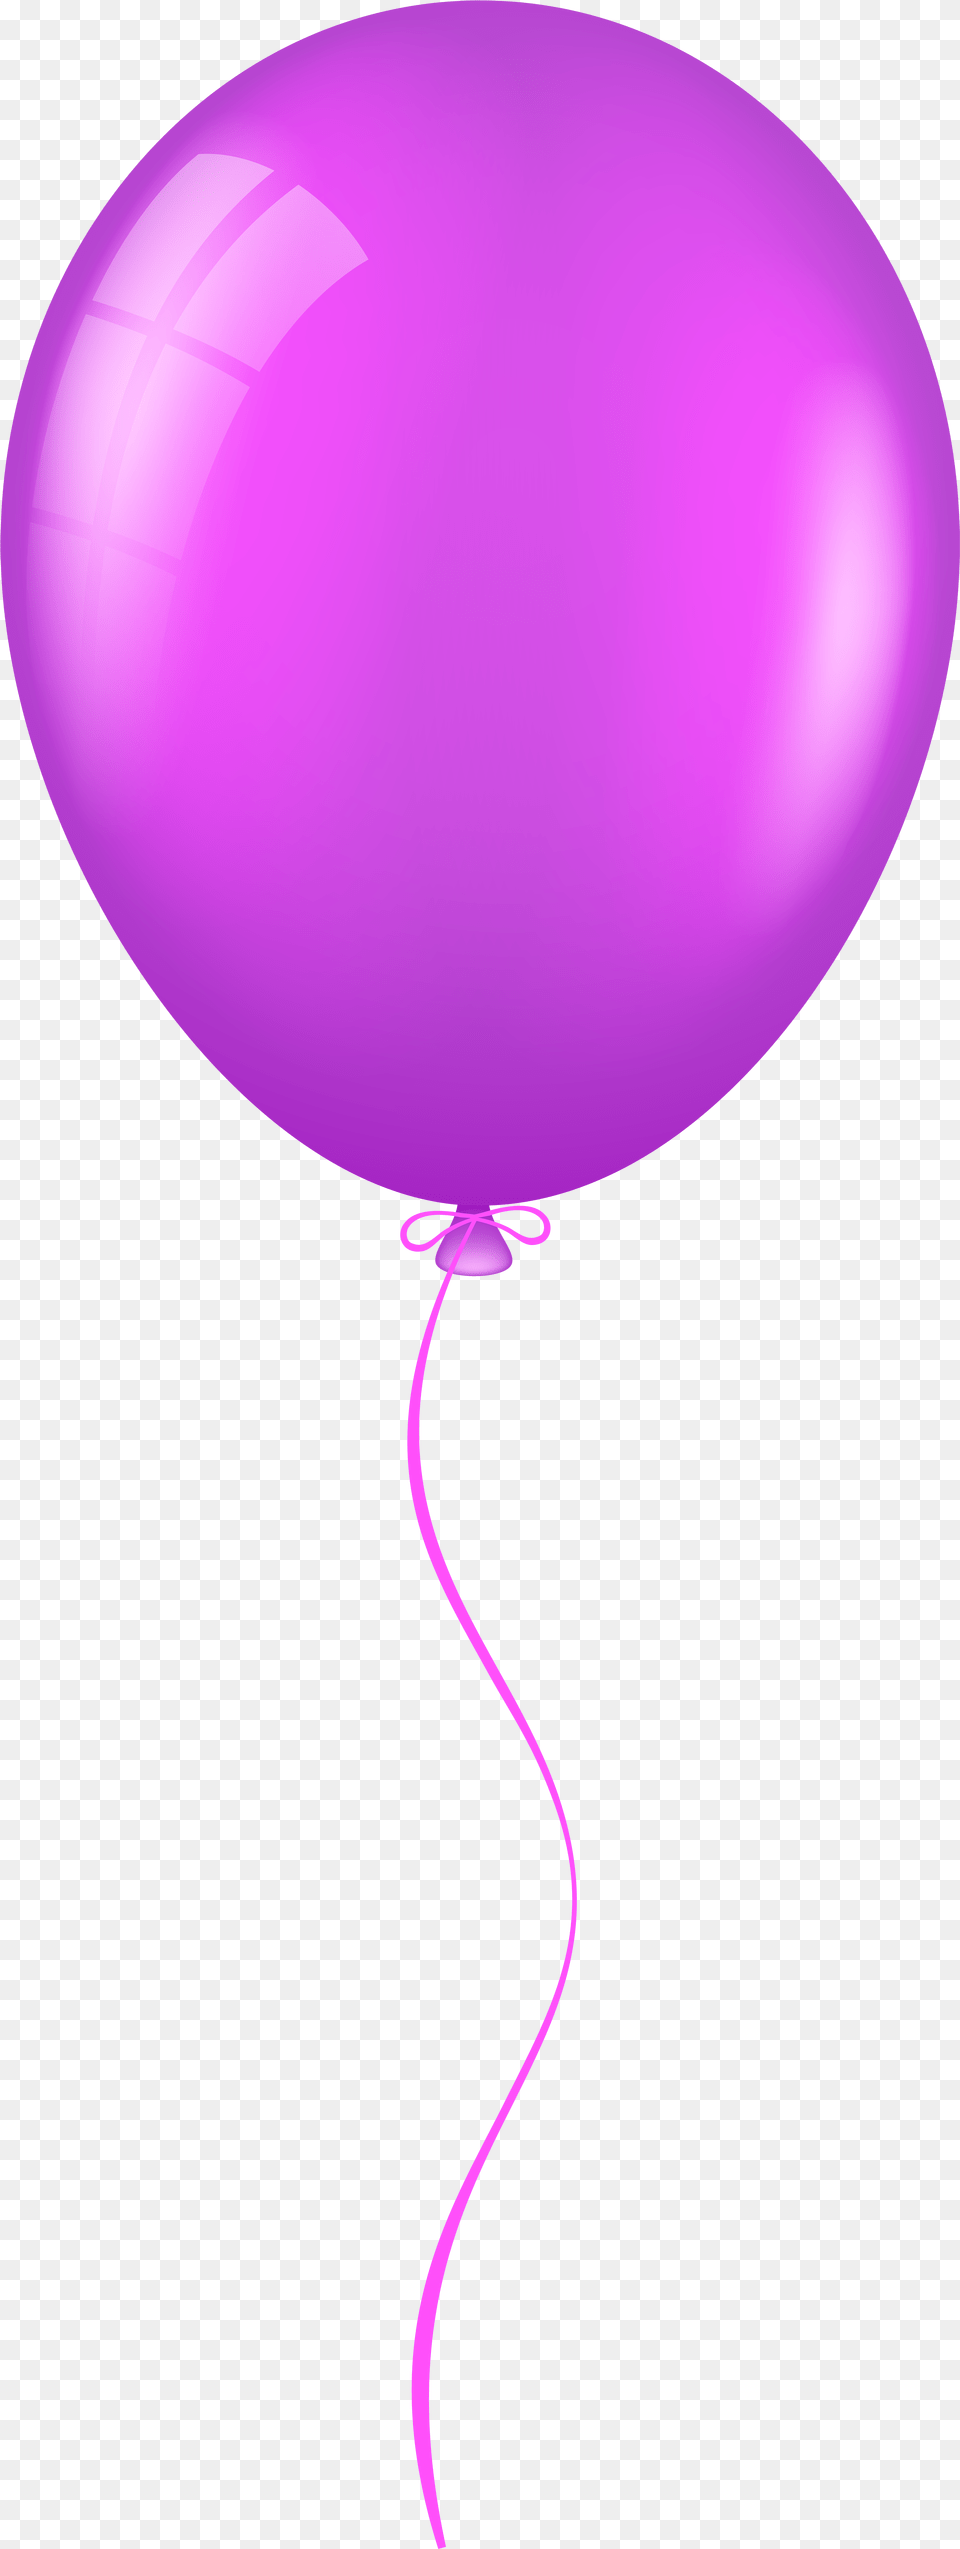 Download Sweet Birthday Free Balloon Transparent Clear Background Birthday Balloon Clipart, Purple Png Image